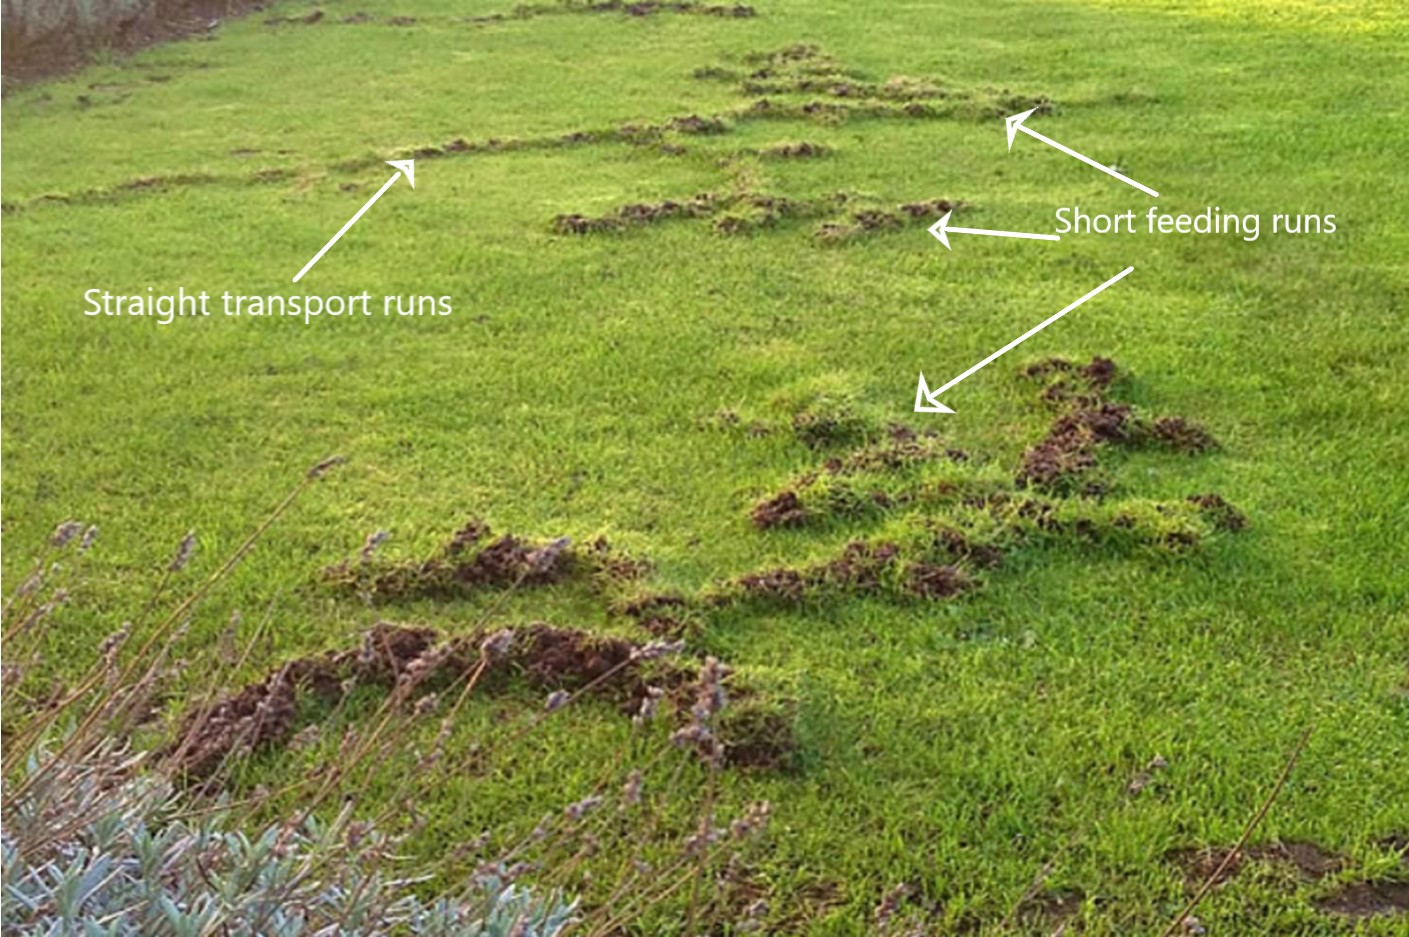 A lawn that has been damaged by mole activity showing the routs that moles take under the surface.